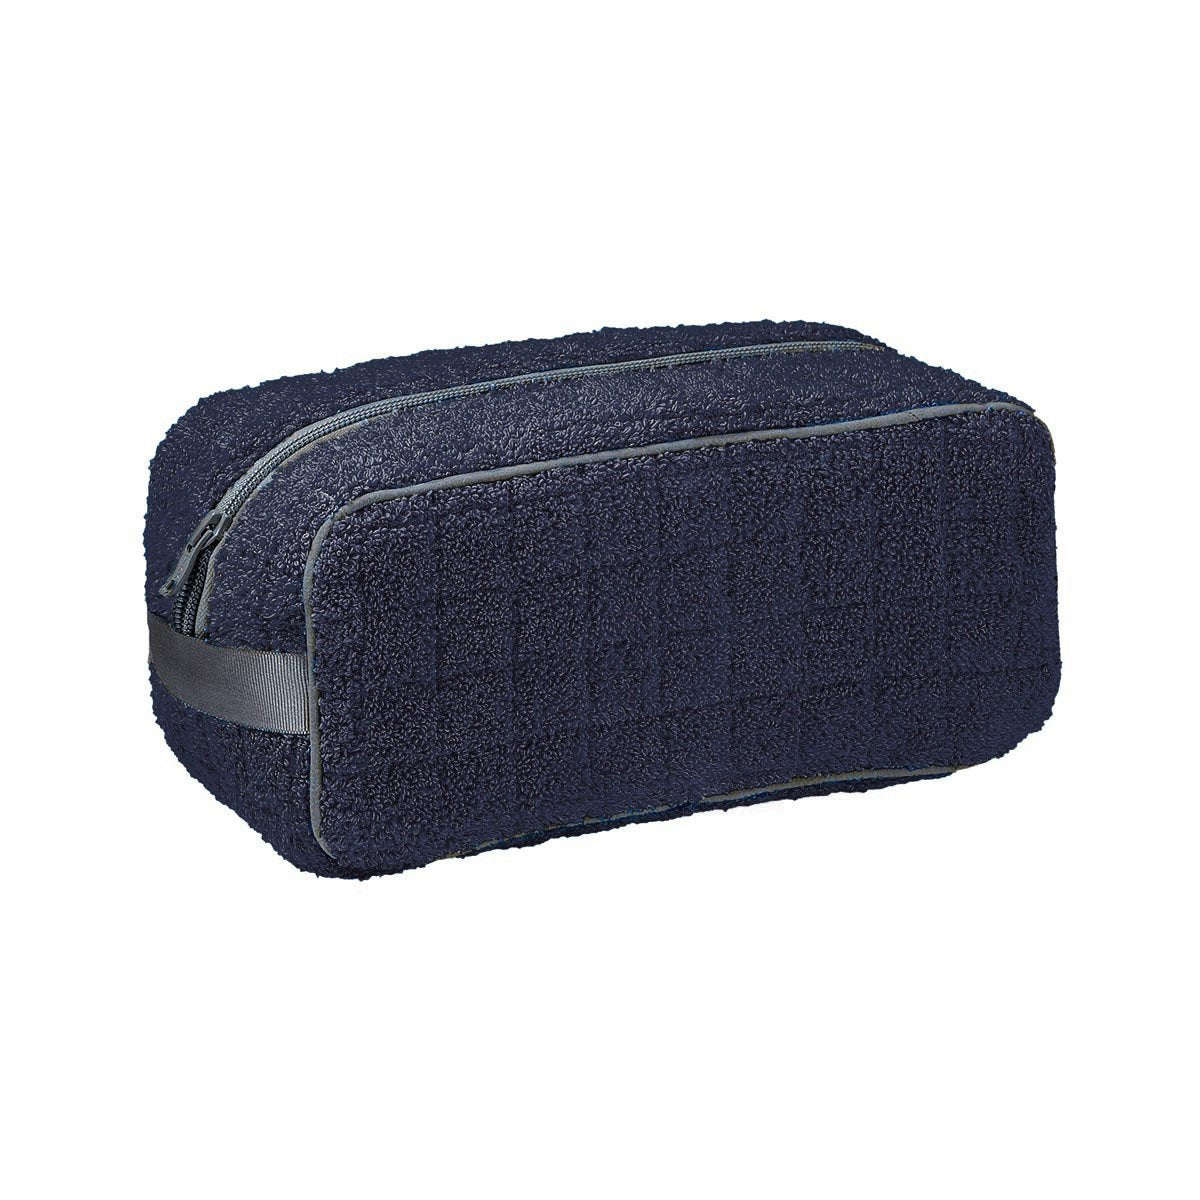 Etoile Marine Toiletry Bag by Yves Delorme | Fig Linens and Home